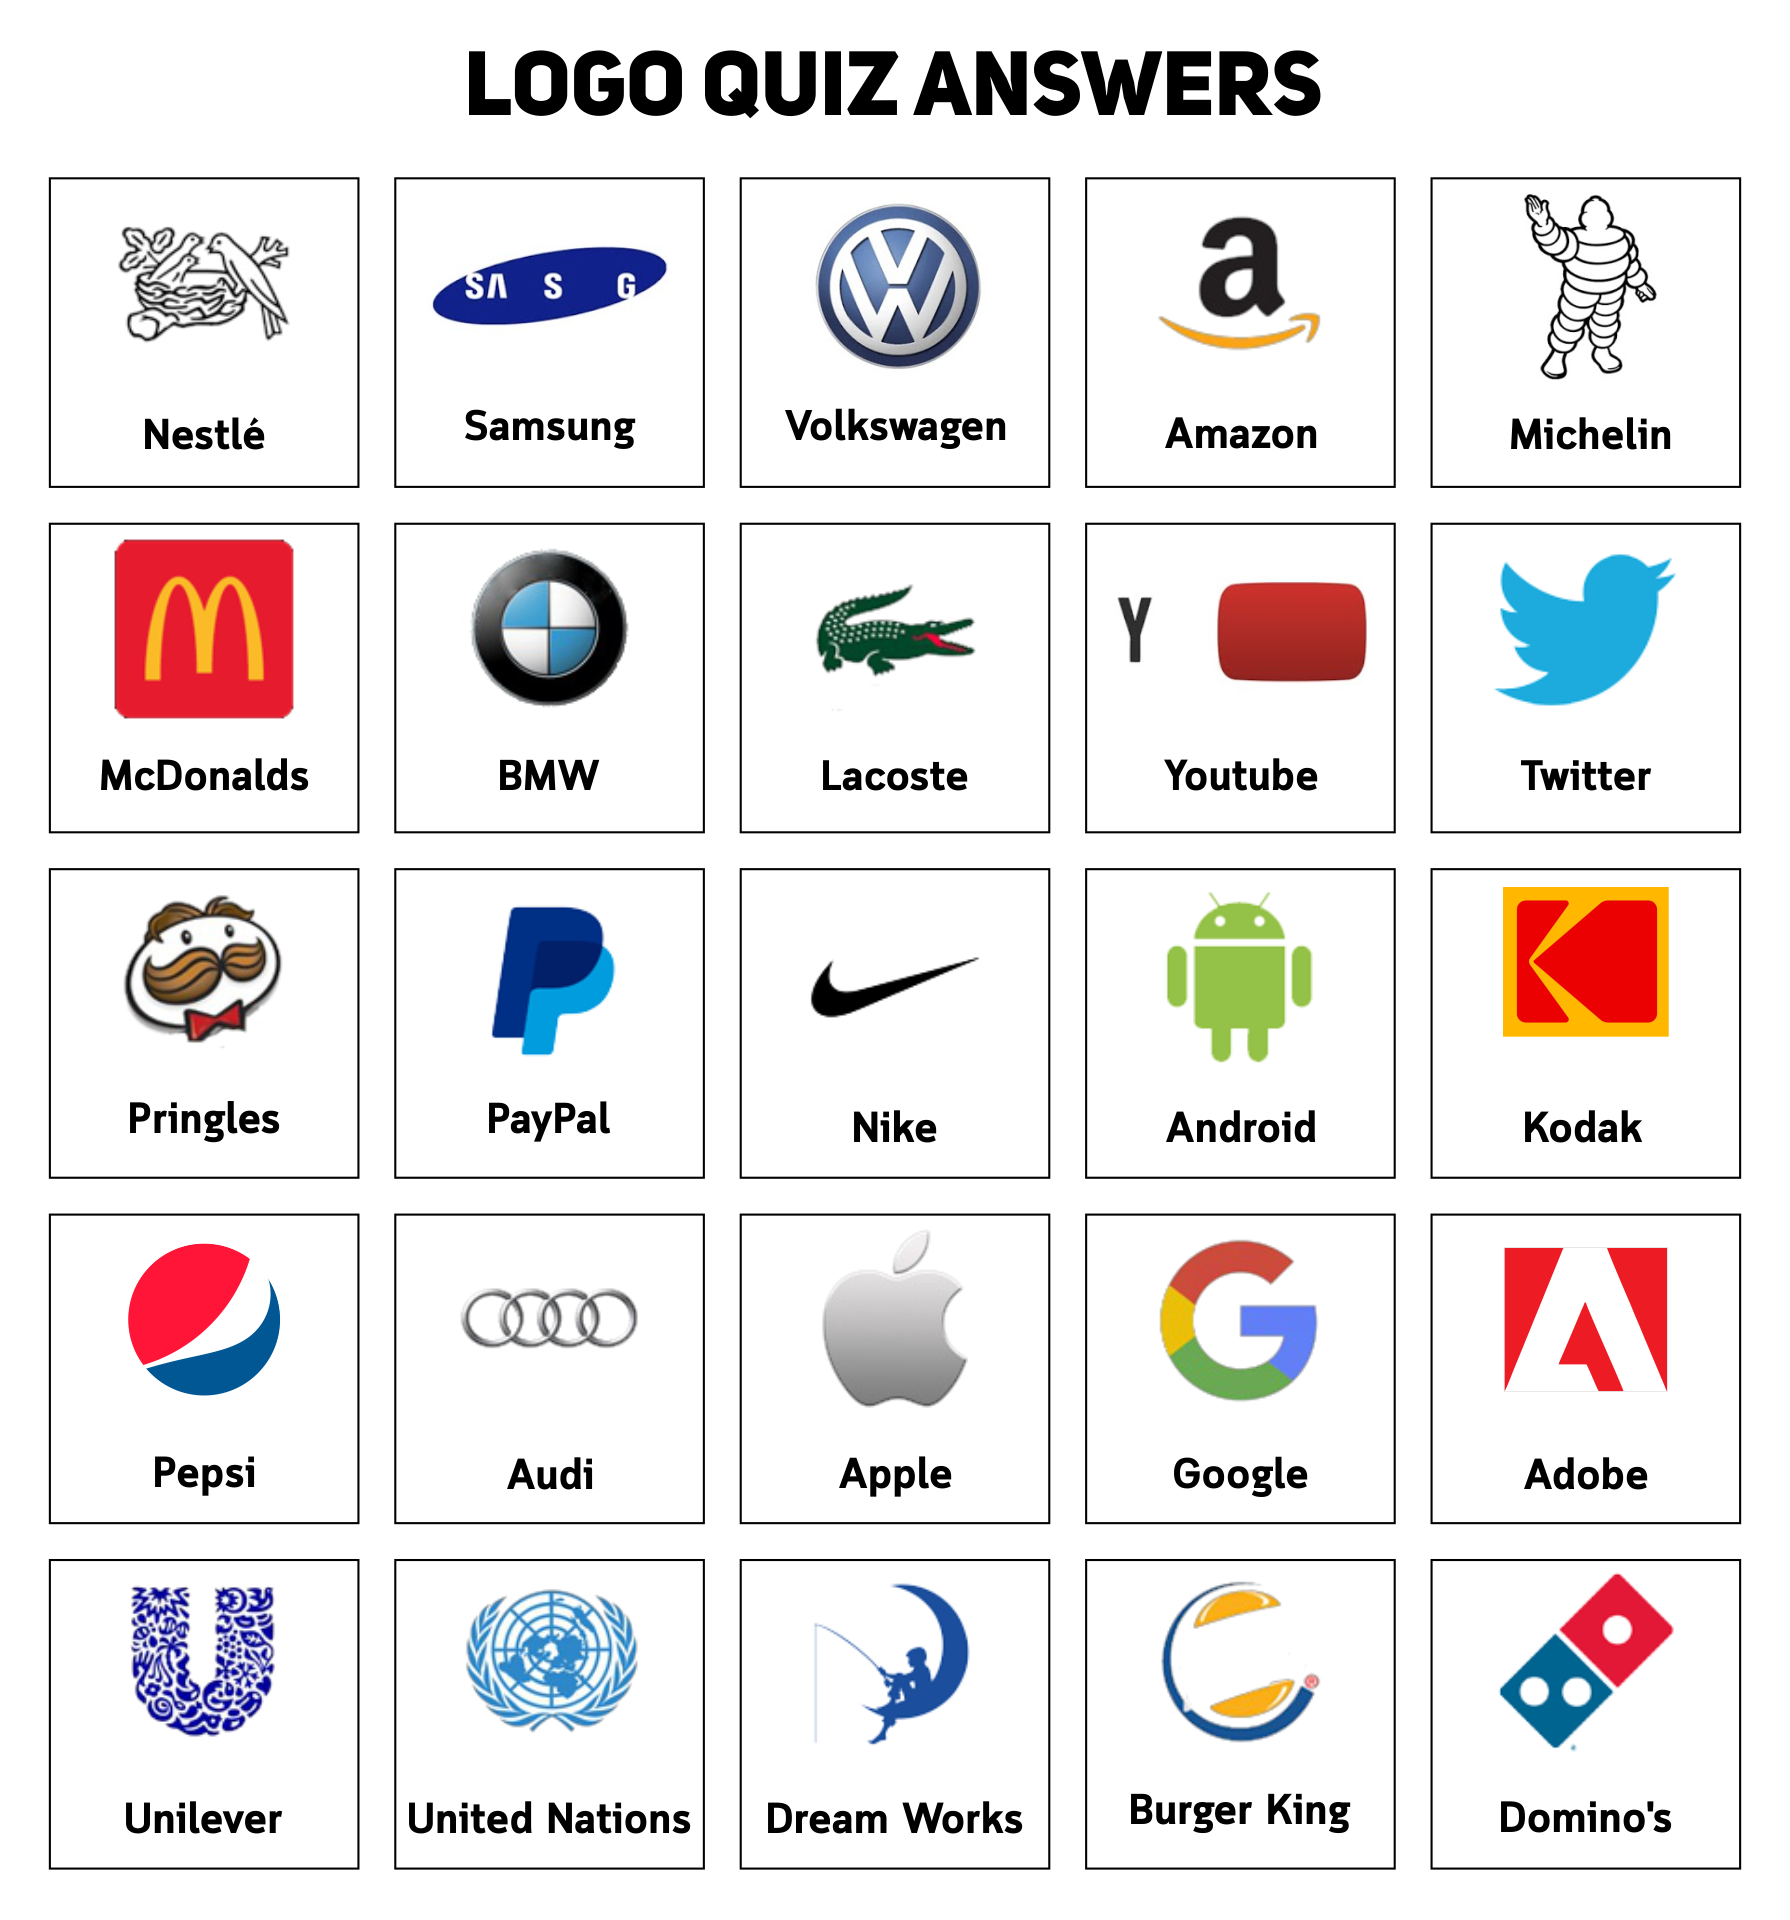 Can you help me with the answers for this logo game